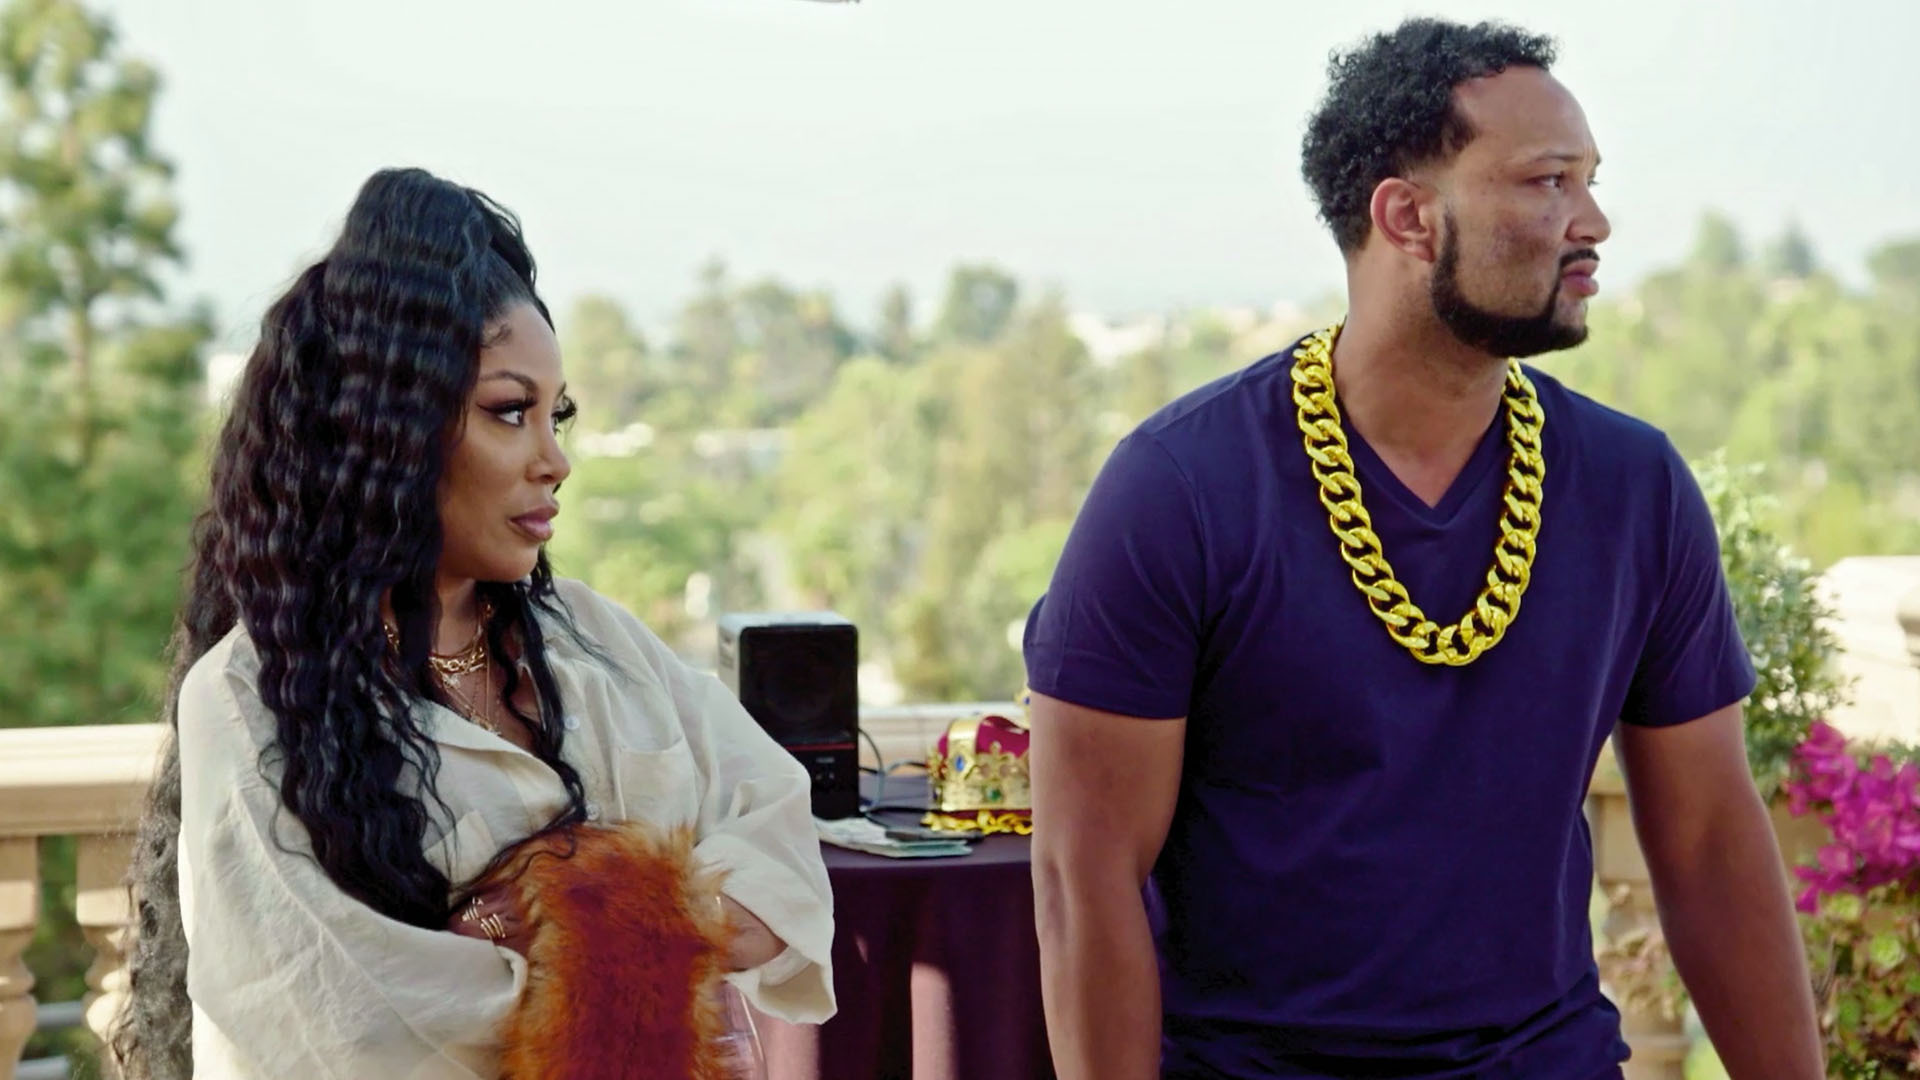 Watch K. Michelle Is Not Sharing Her Man! | Marriage Boot Camp: Hip Hop Edition Video Extras